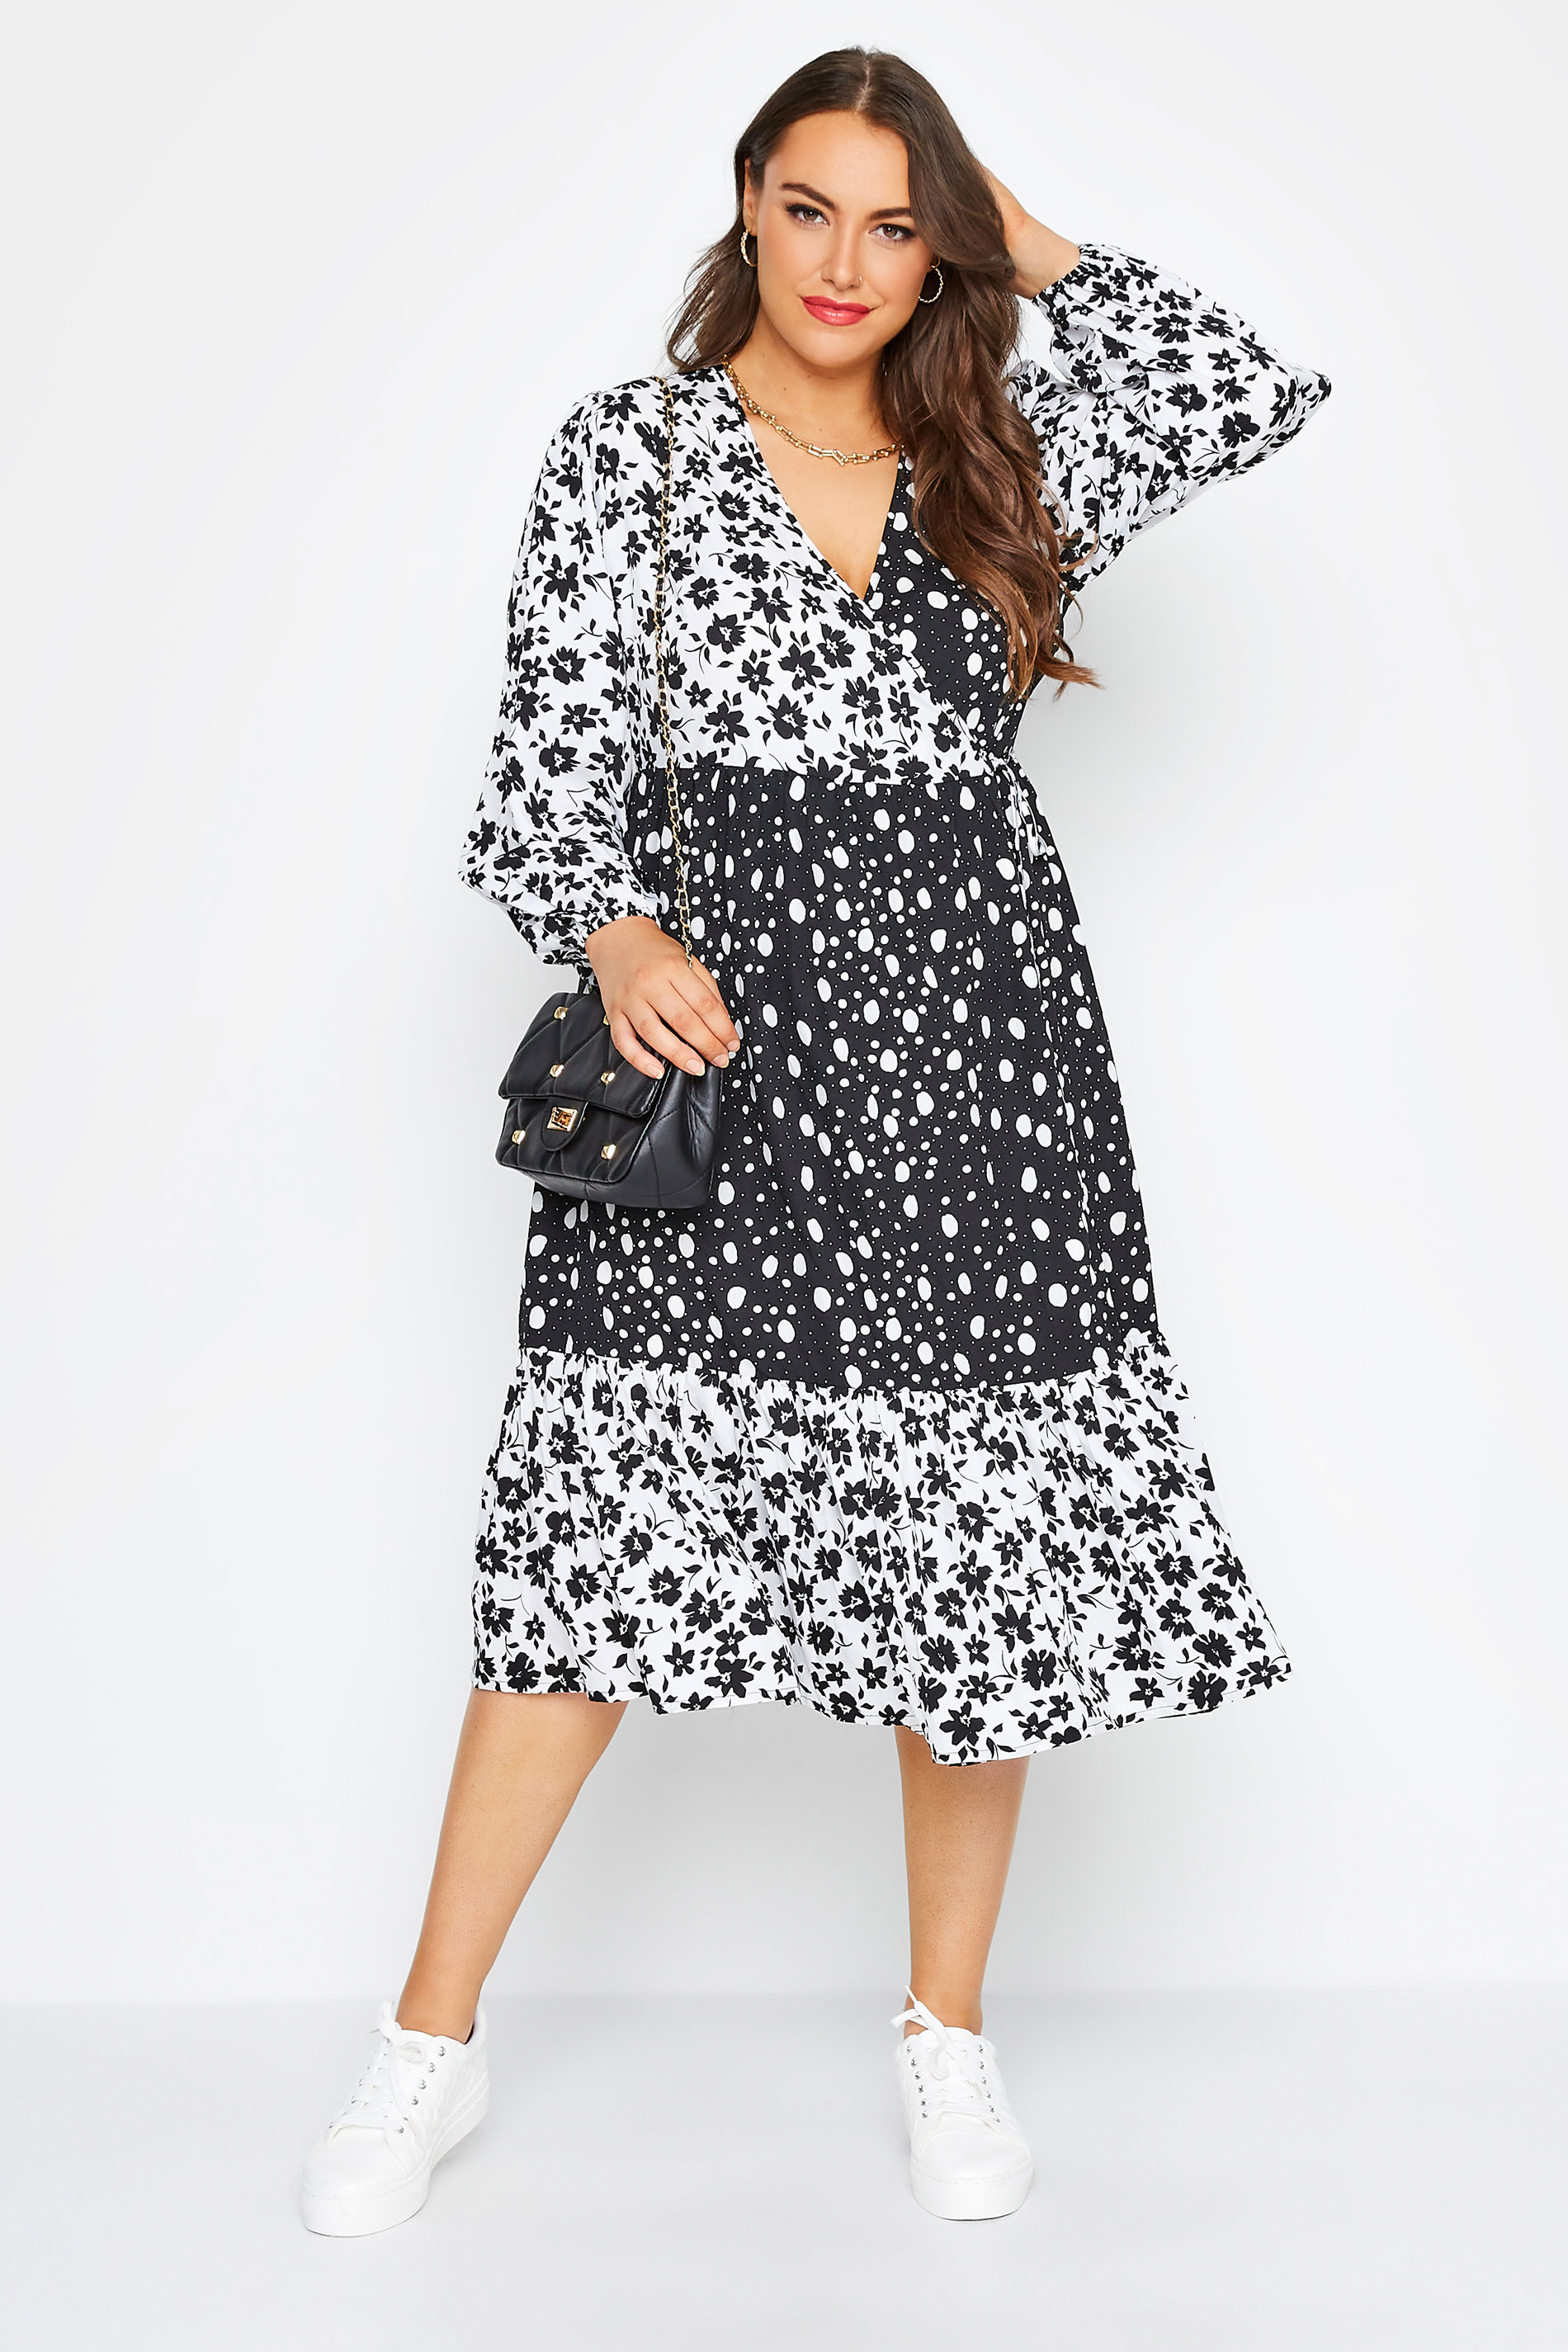 LIMITED COLLECTION Plus Size Black & White Floral Wrap Dress | Yours Clothing 1